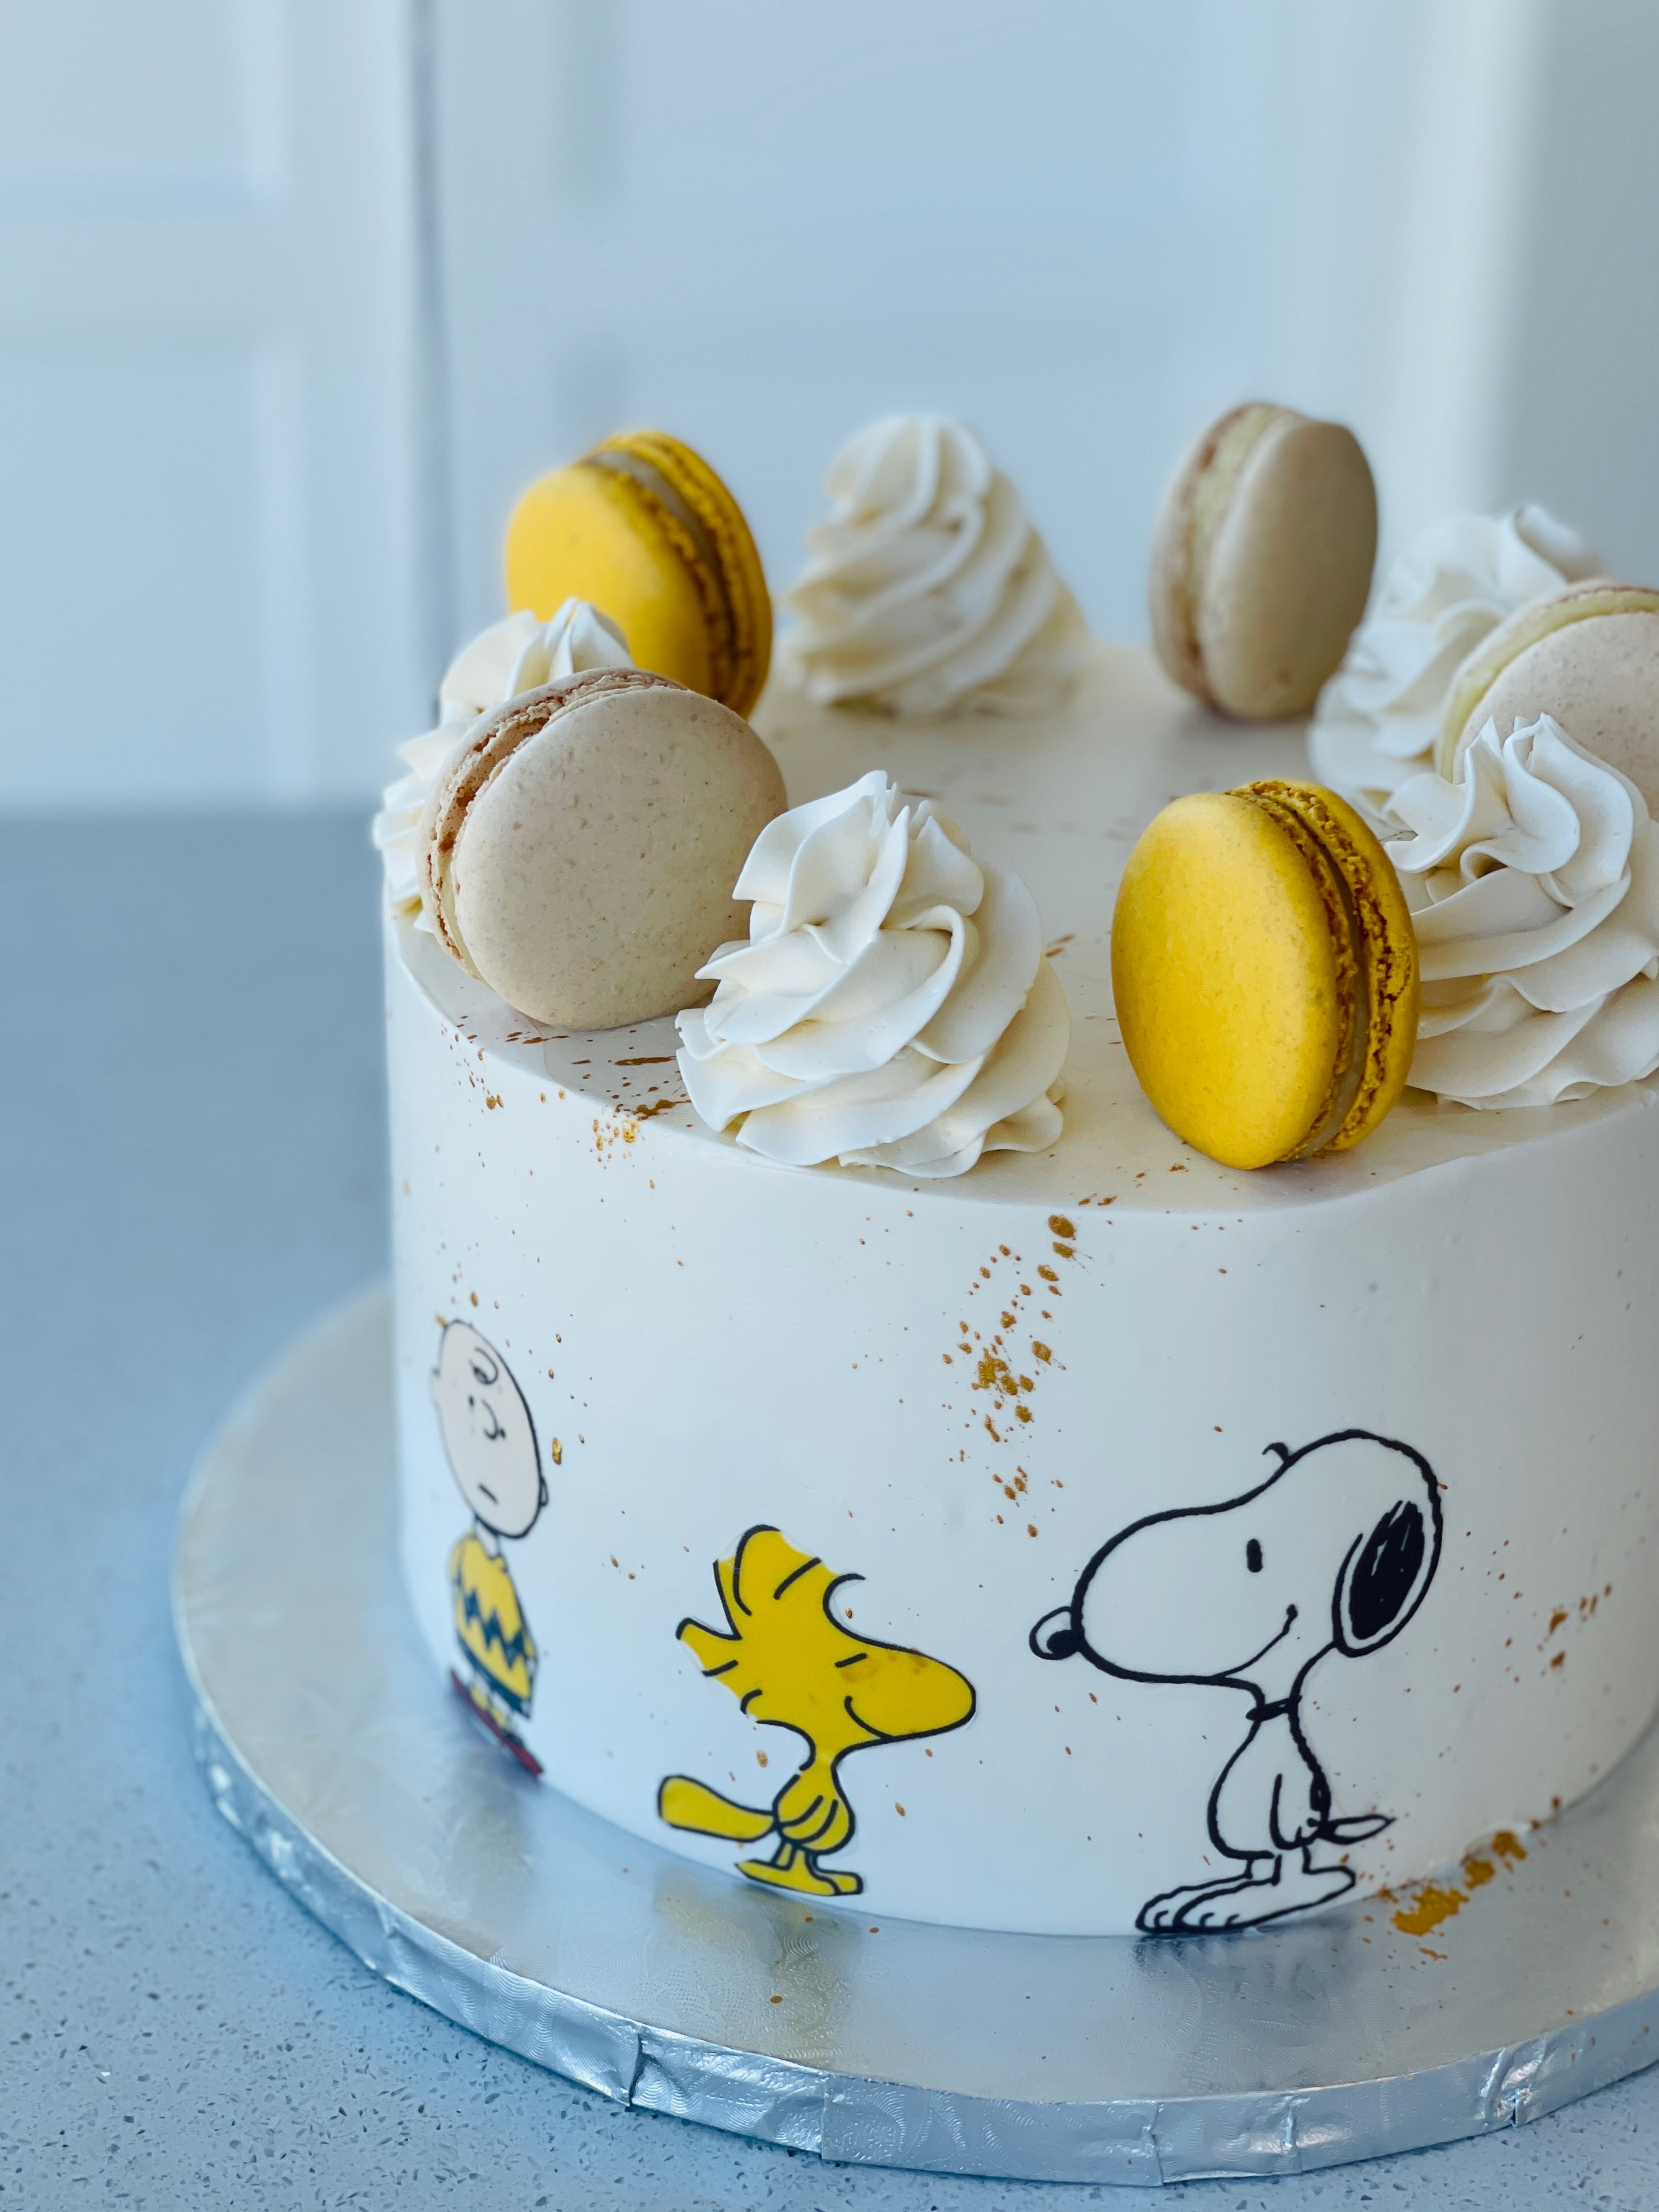 Add a personal touch to your next celebration cake with Goldilocks